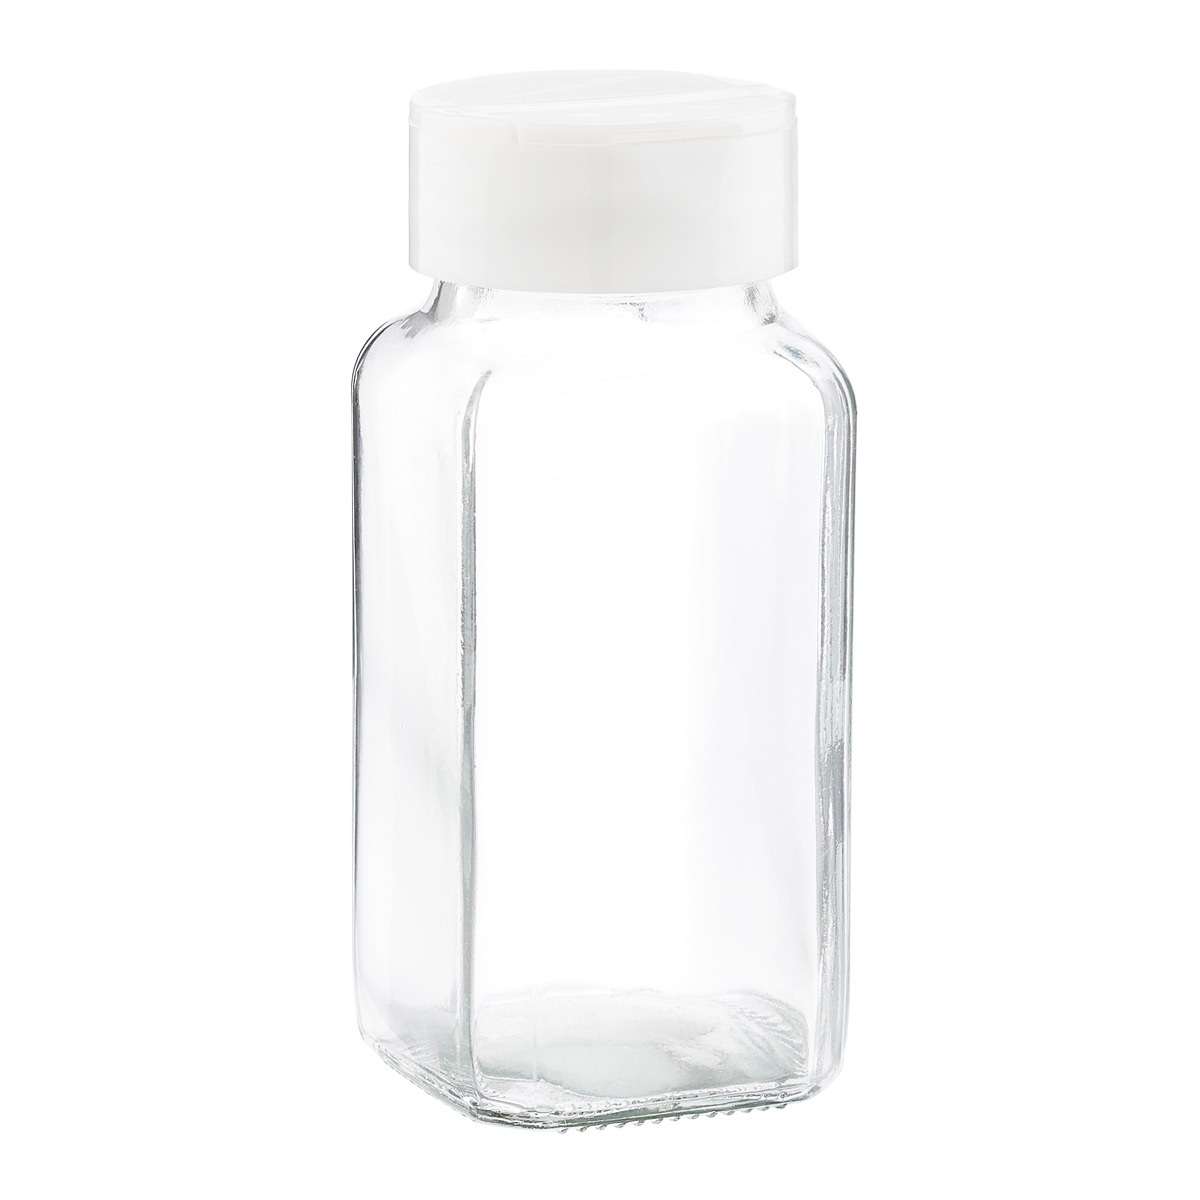 https://www.containerstore.com/catalogimages/433229/10085714_6_Oz_Glass_Shaker_with_Butt.jpg